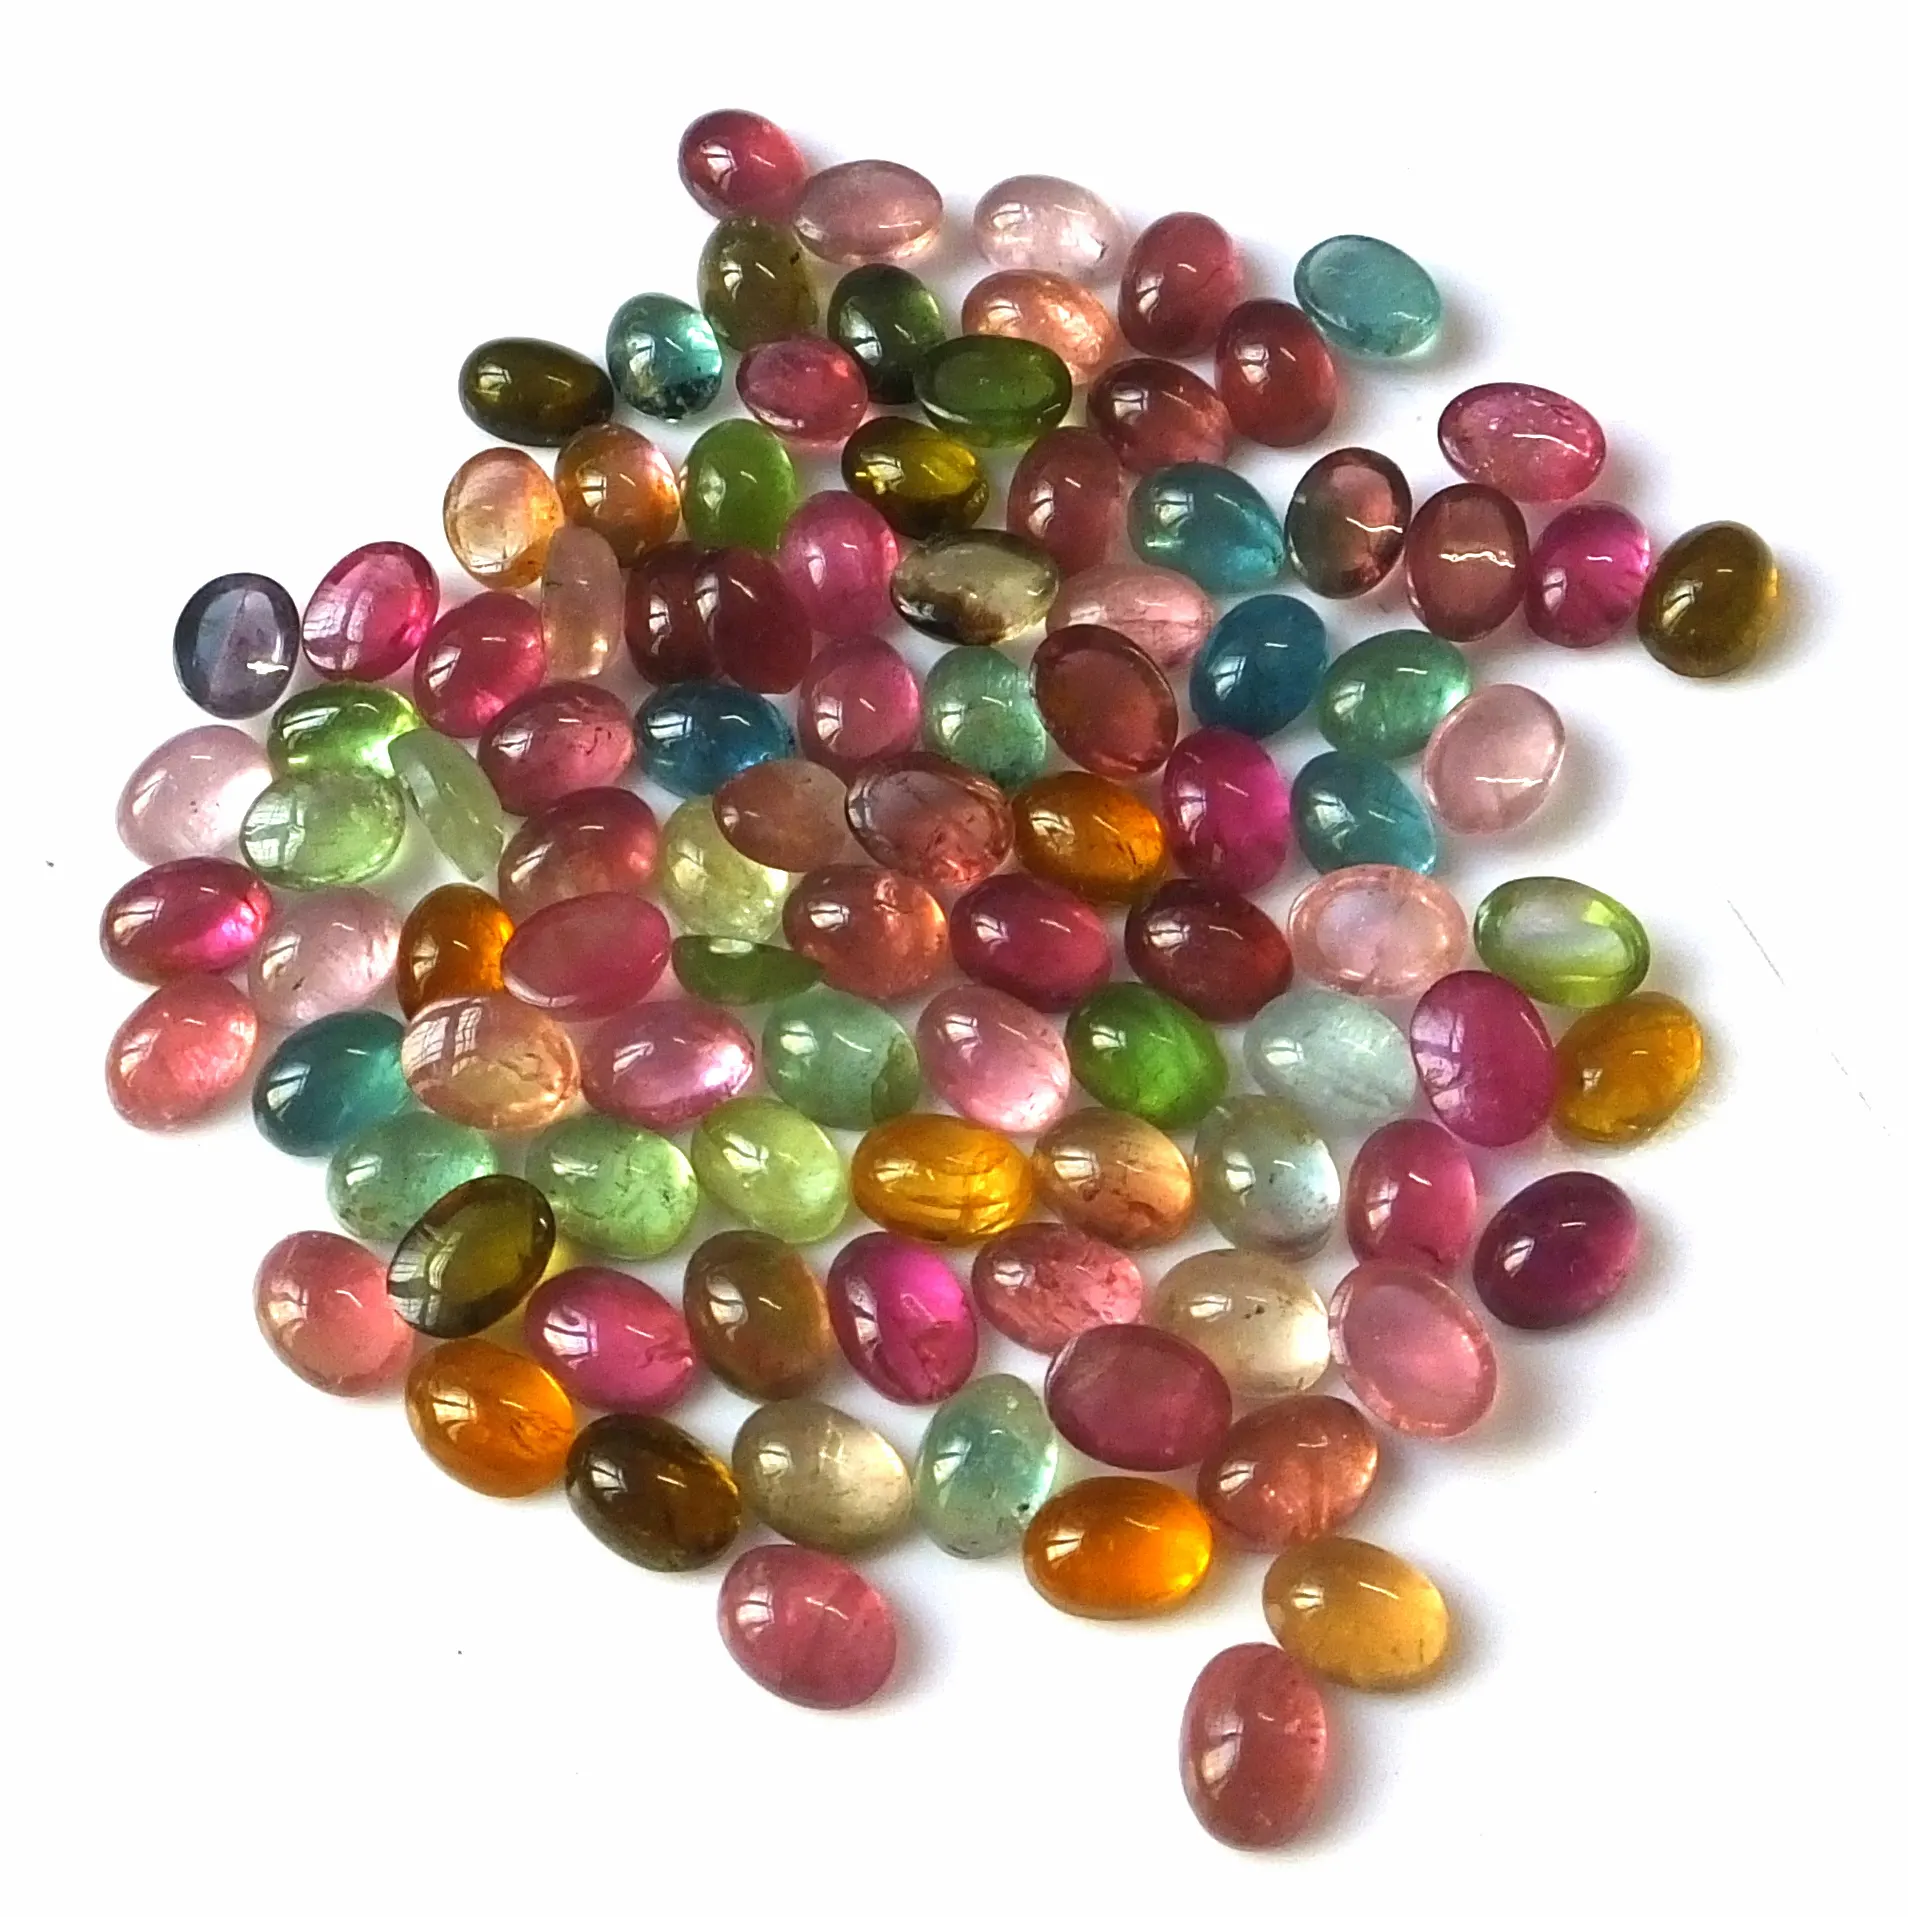 Natural tourmaline cabochon 7X5 mm oval shape untreated multi color wholesale loose gemstone making jewelry